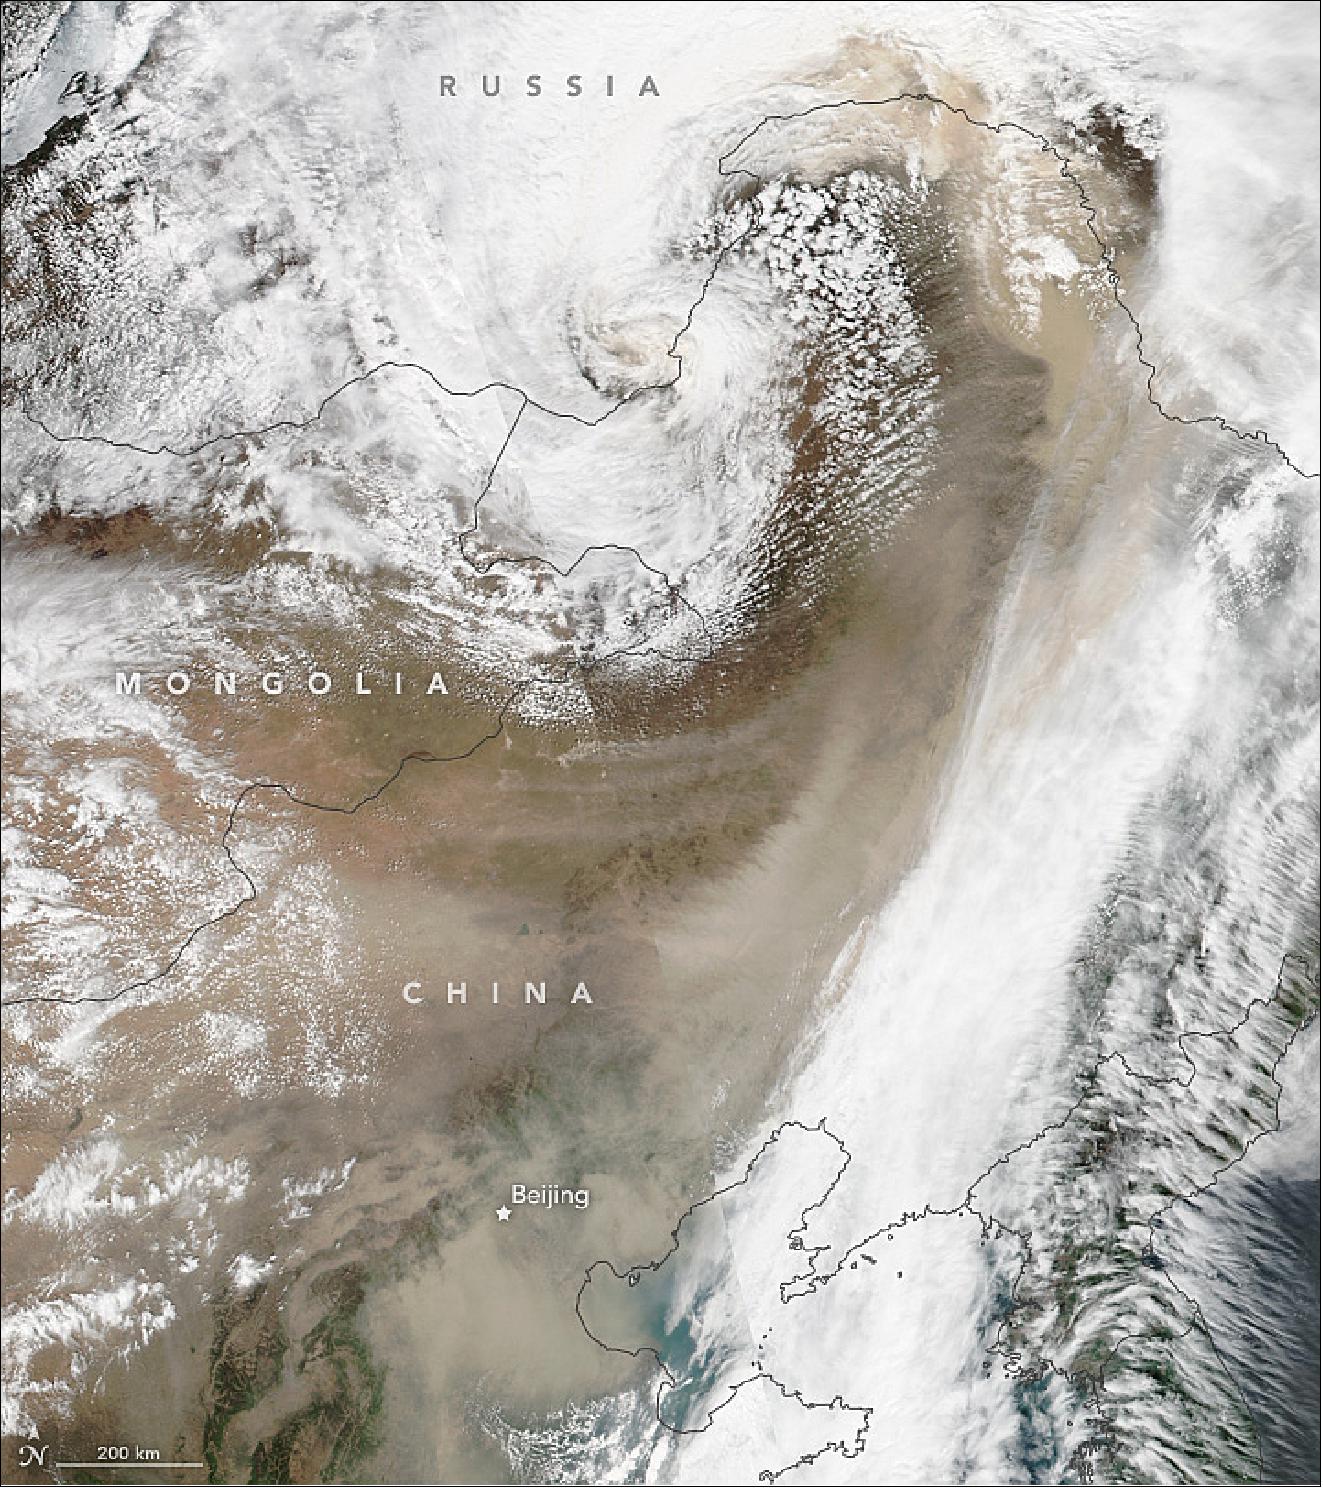 Figure 106: VIIRS image on Suomi NPP, acquired on May 4, 2017, showing skies thick with dust across much of northeastern China (image credit: NASA Earth Observatory, image by Jeff Schmaltz, caption by Adam Voiland)